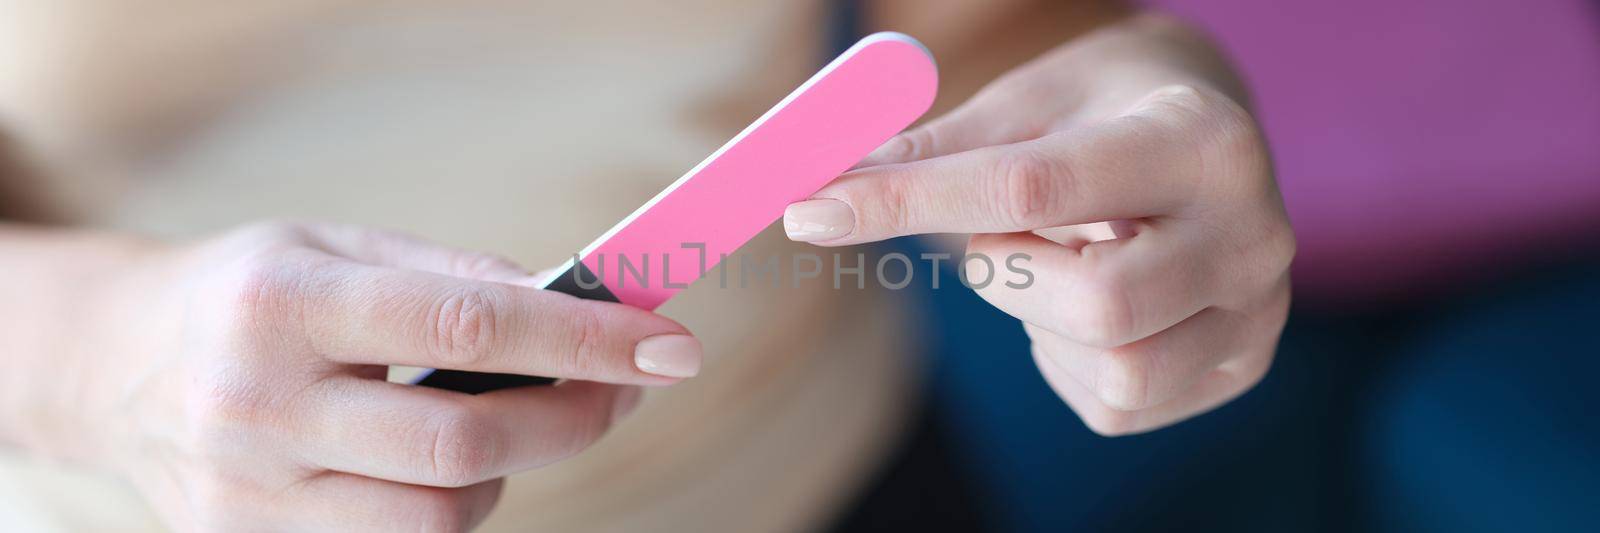 Woman files fingernails with pink nail file closeup by kuprevich